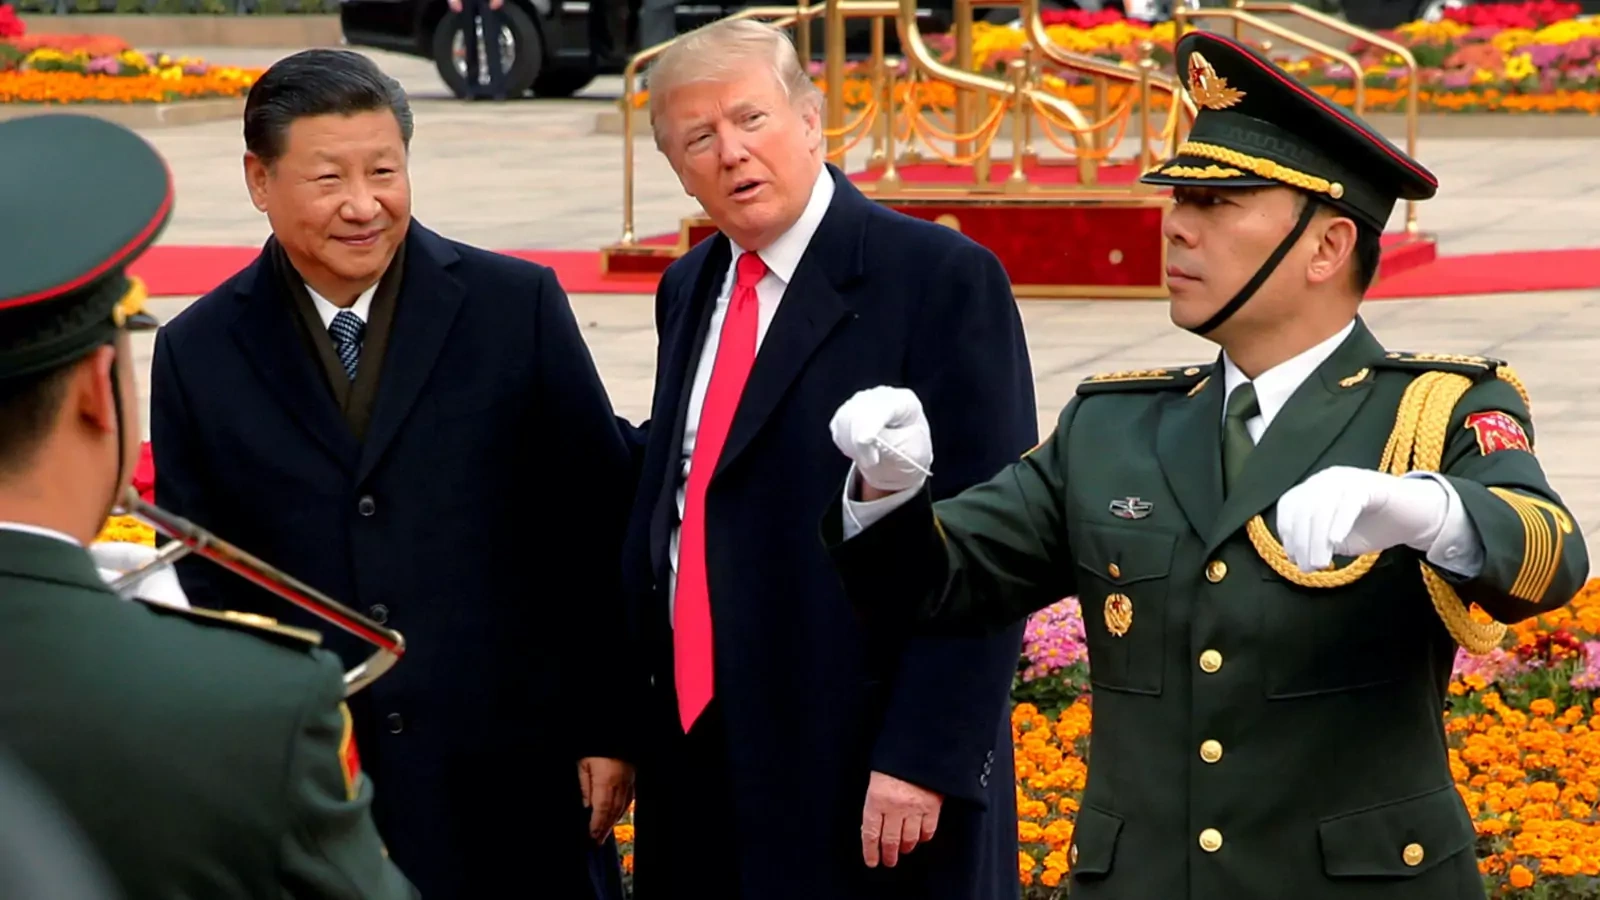 U.S. President Donald Trump takes part in a welcoming ceremony with China's President Xi Jinping in Beijing, China.